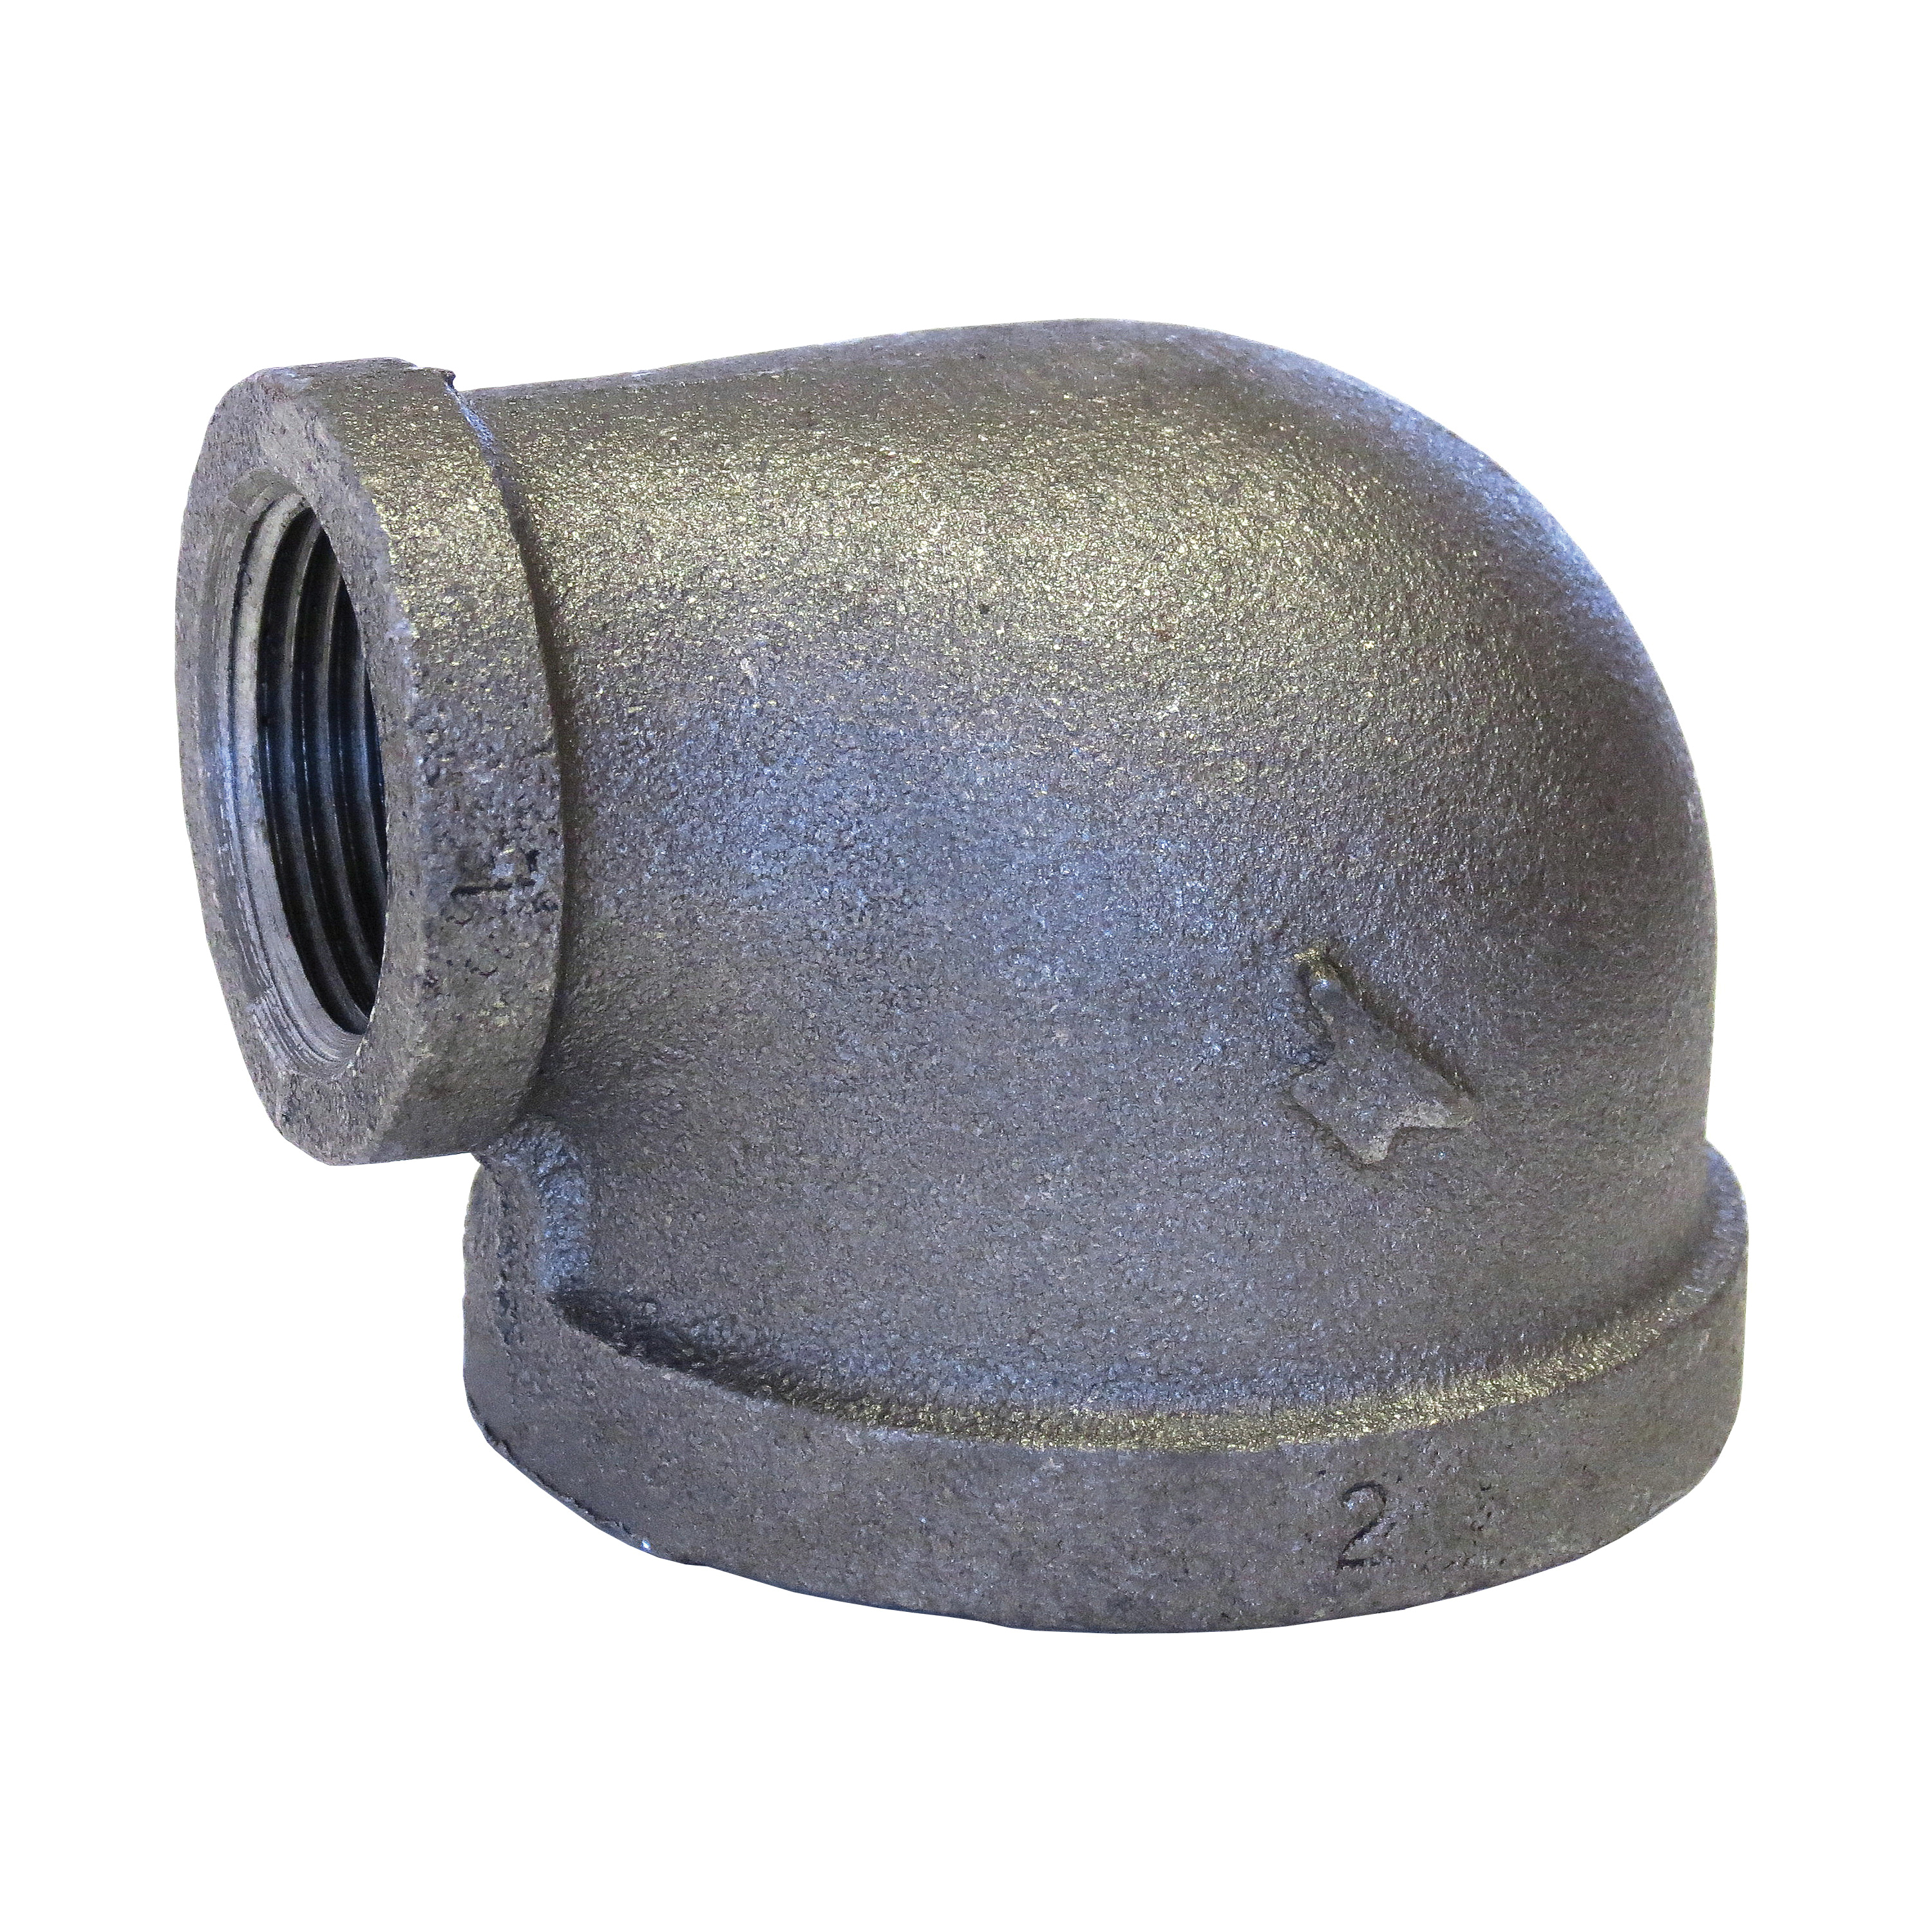 SPF/Anvil™ 0810008607 FIG 3101R 90 deg Pipe Reducing Elbow, 1 x 1/2 in Nominal, FNPT End Style, 150 lb, Malleable Iron, Black Oxide, Import